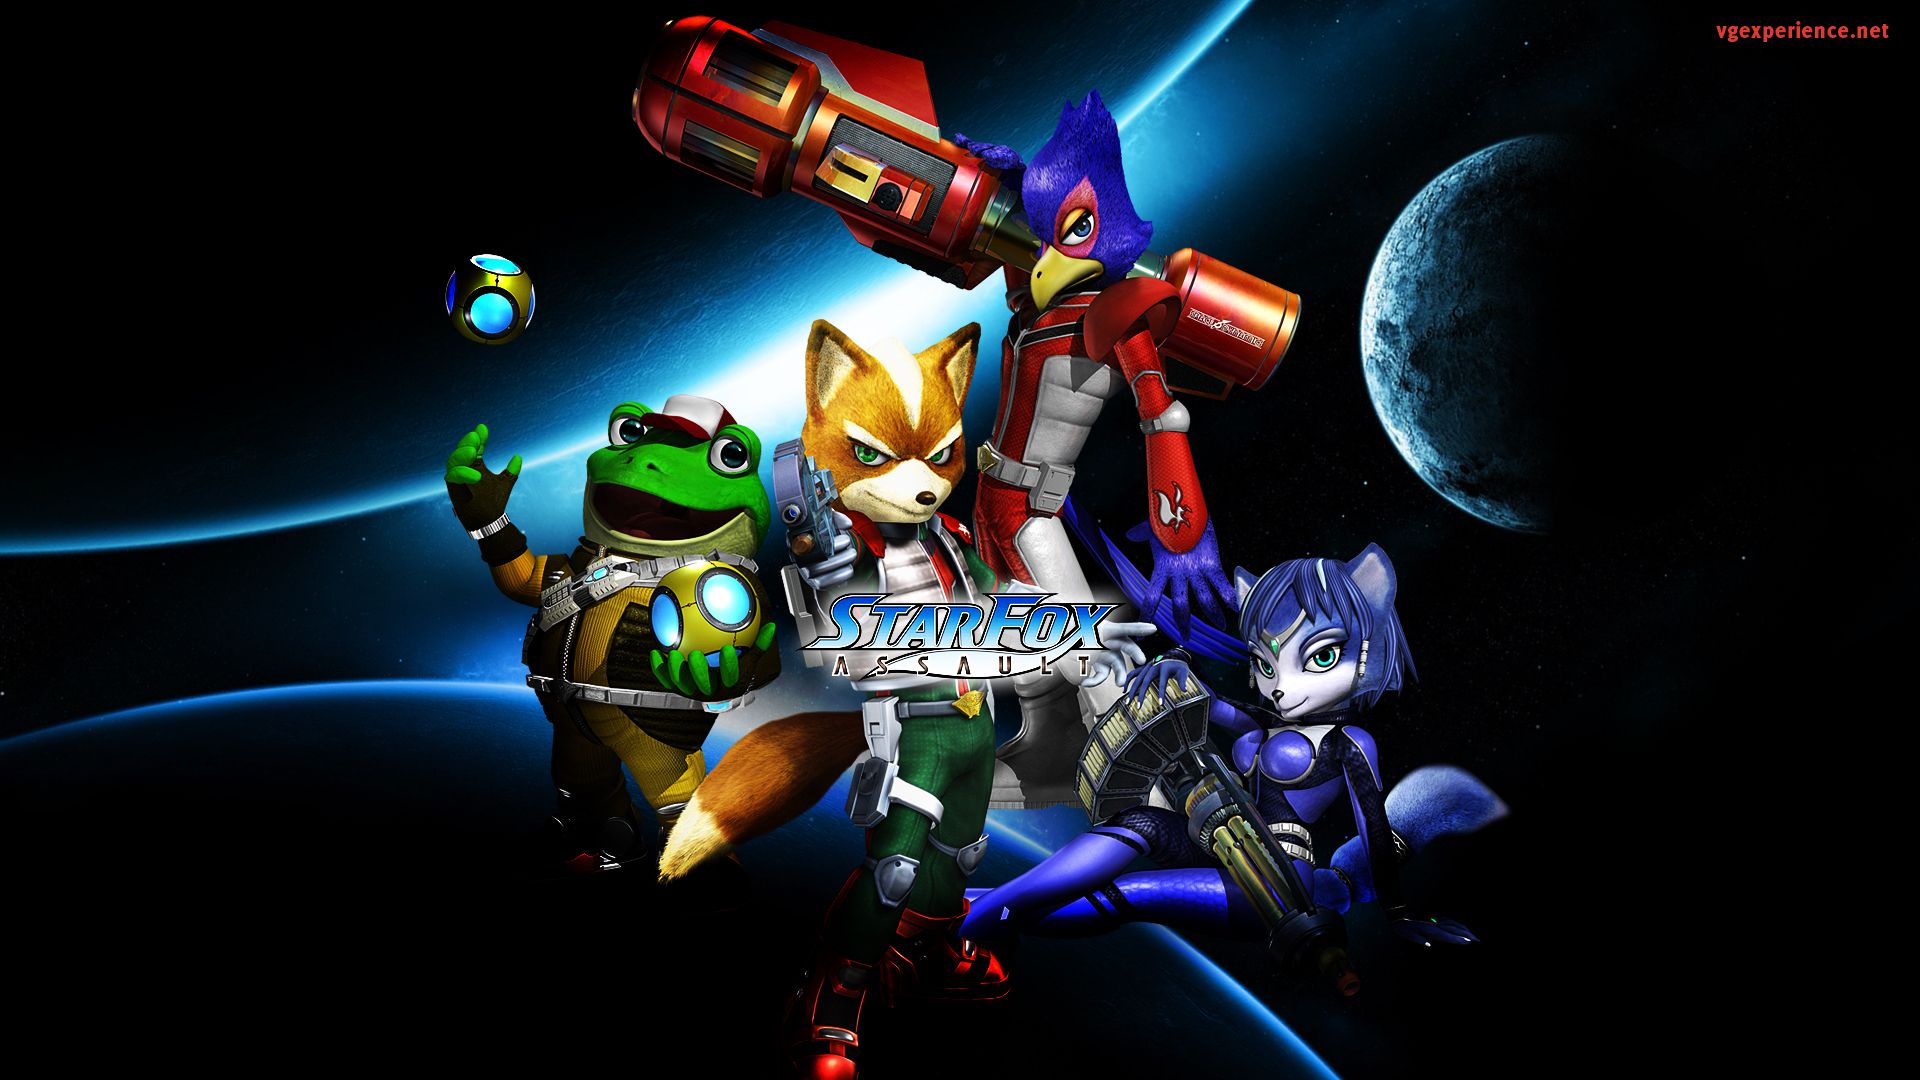 Some Starfox Pictures 3 - Video Games Photo 36954308 - Fanpop